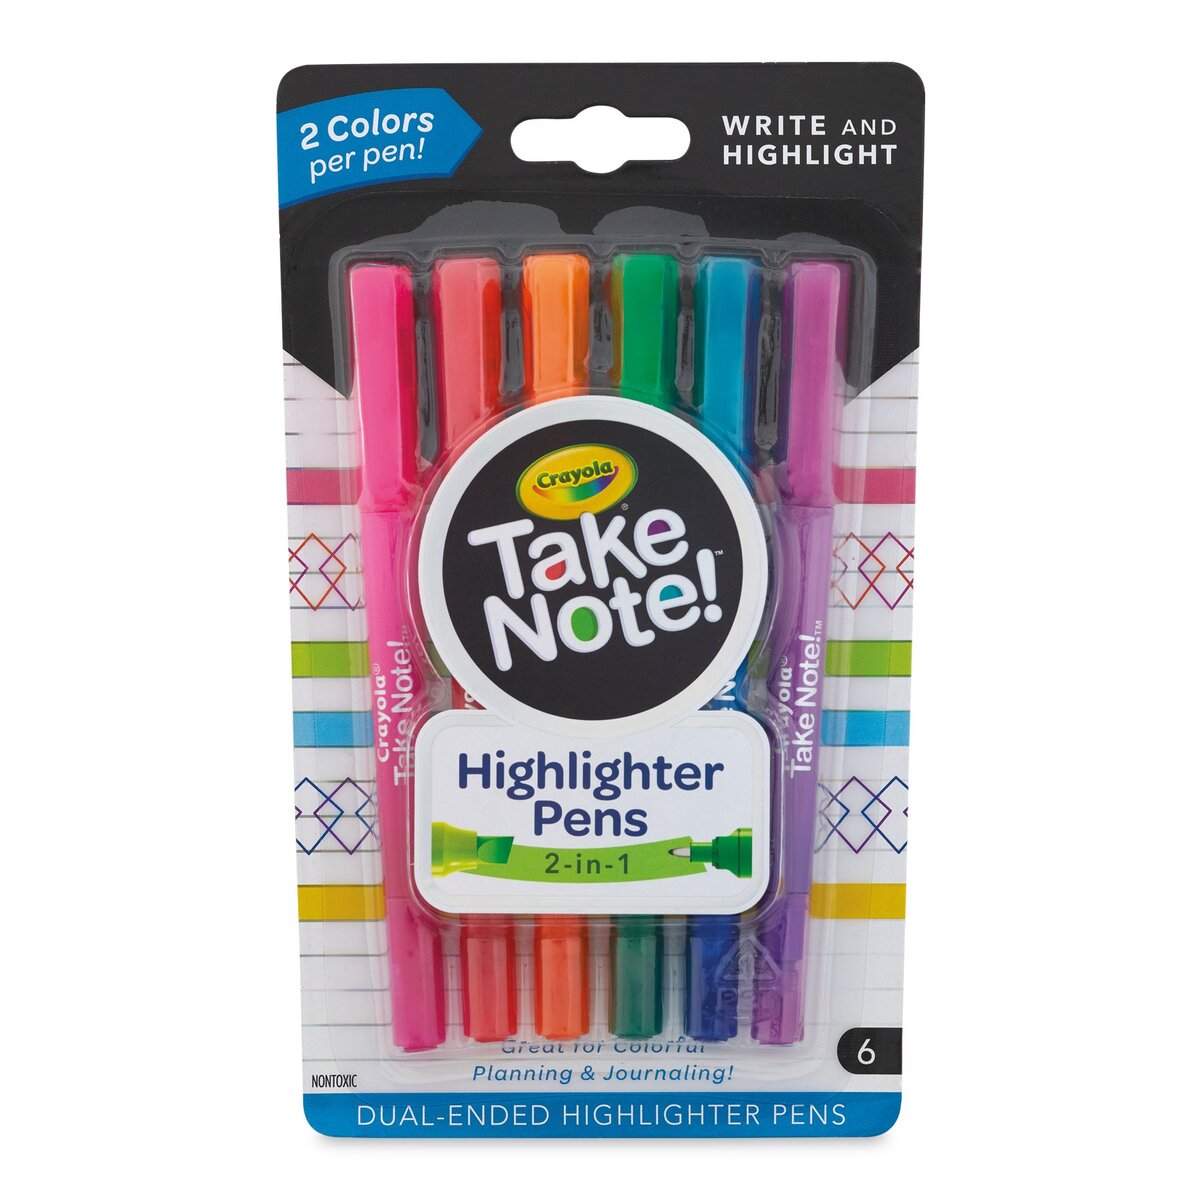 Crayola Take Note Erasable Highlighters School Art Supplies 6 Colors NEW! 